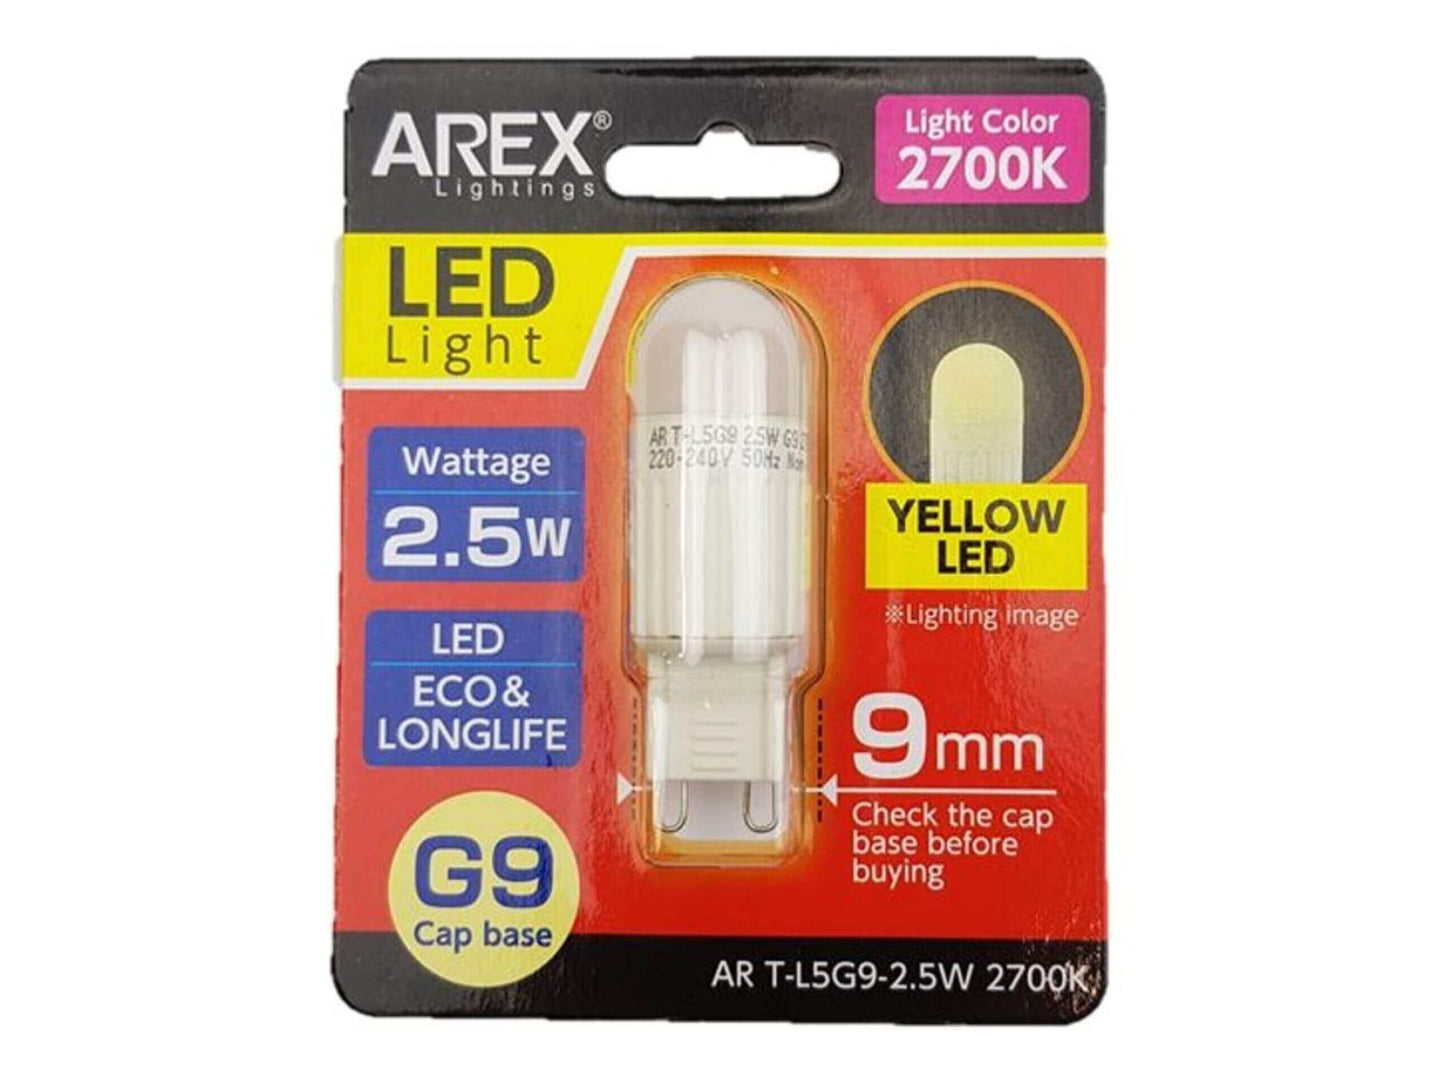 AREX AR T-L5G9-2.5W 2700K Frosted Led Lampu Kuning